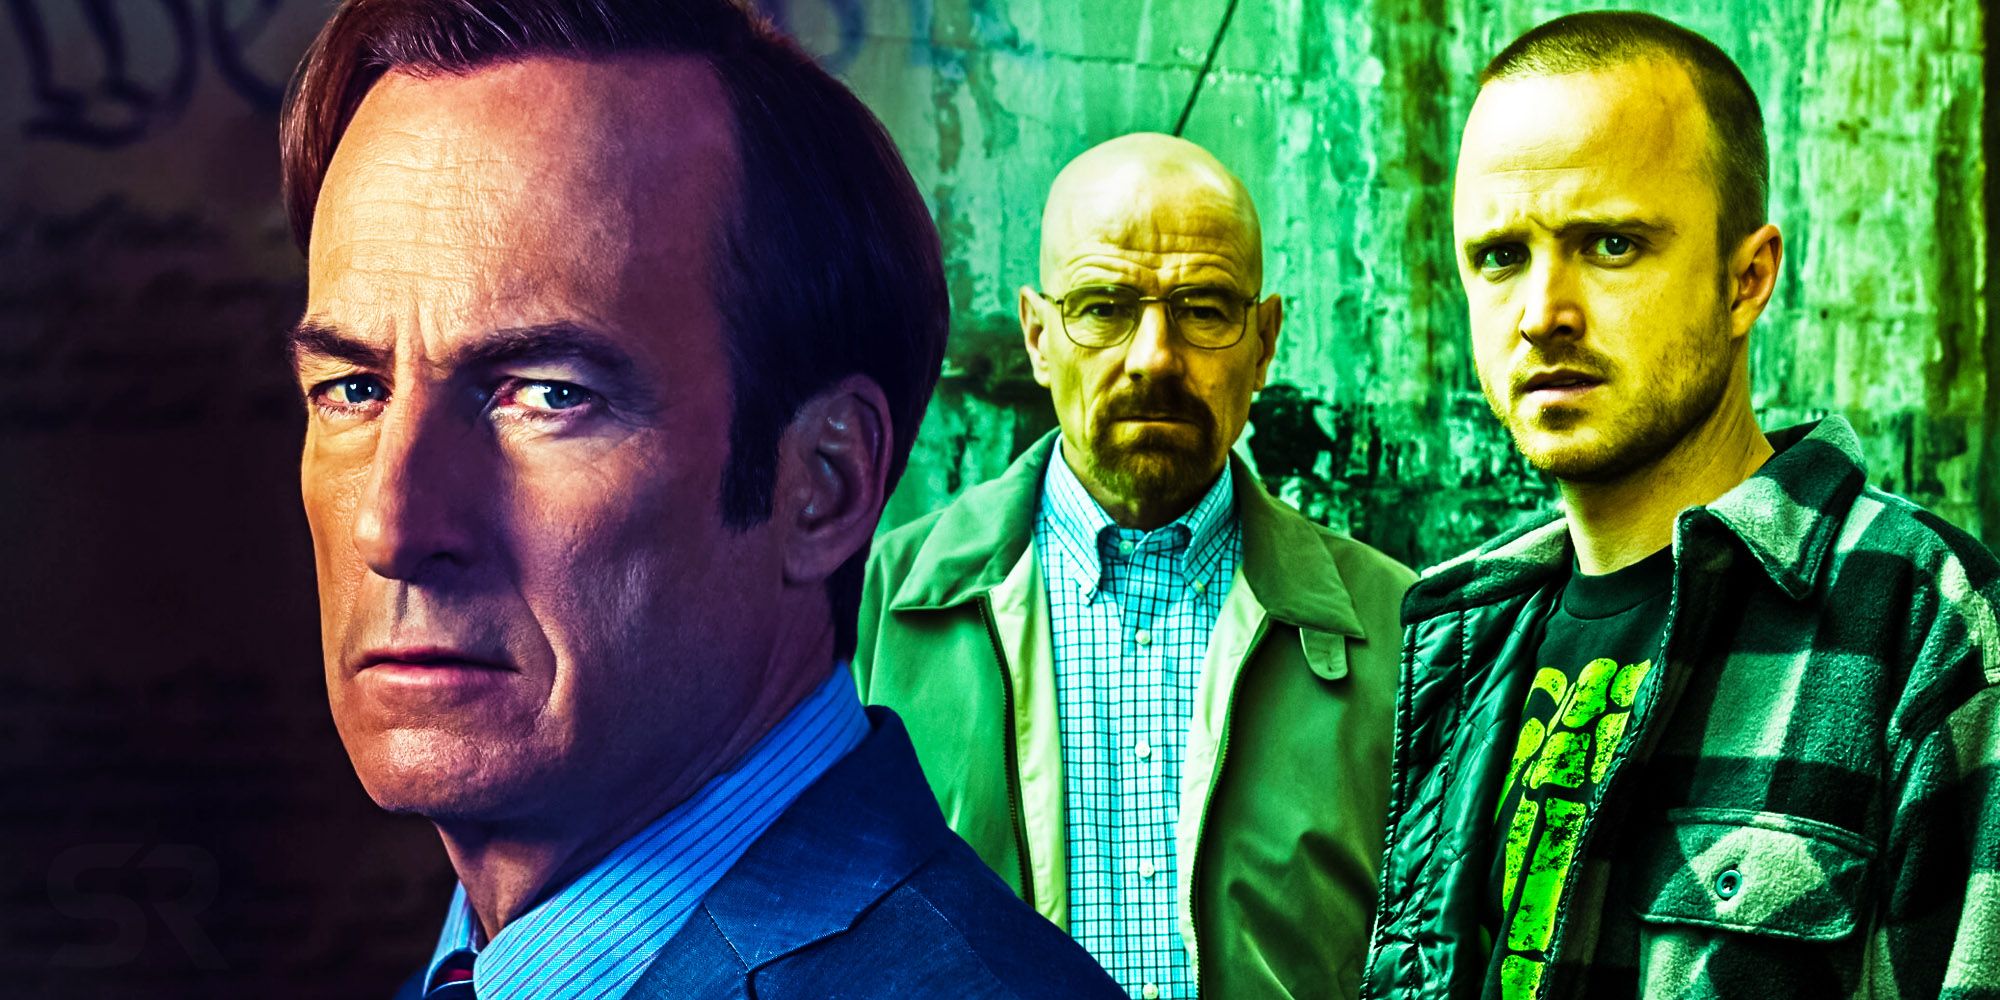 Composite image of Saul with Walt and Jesse